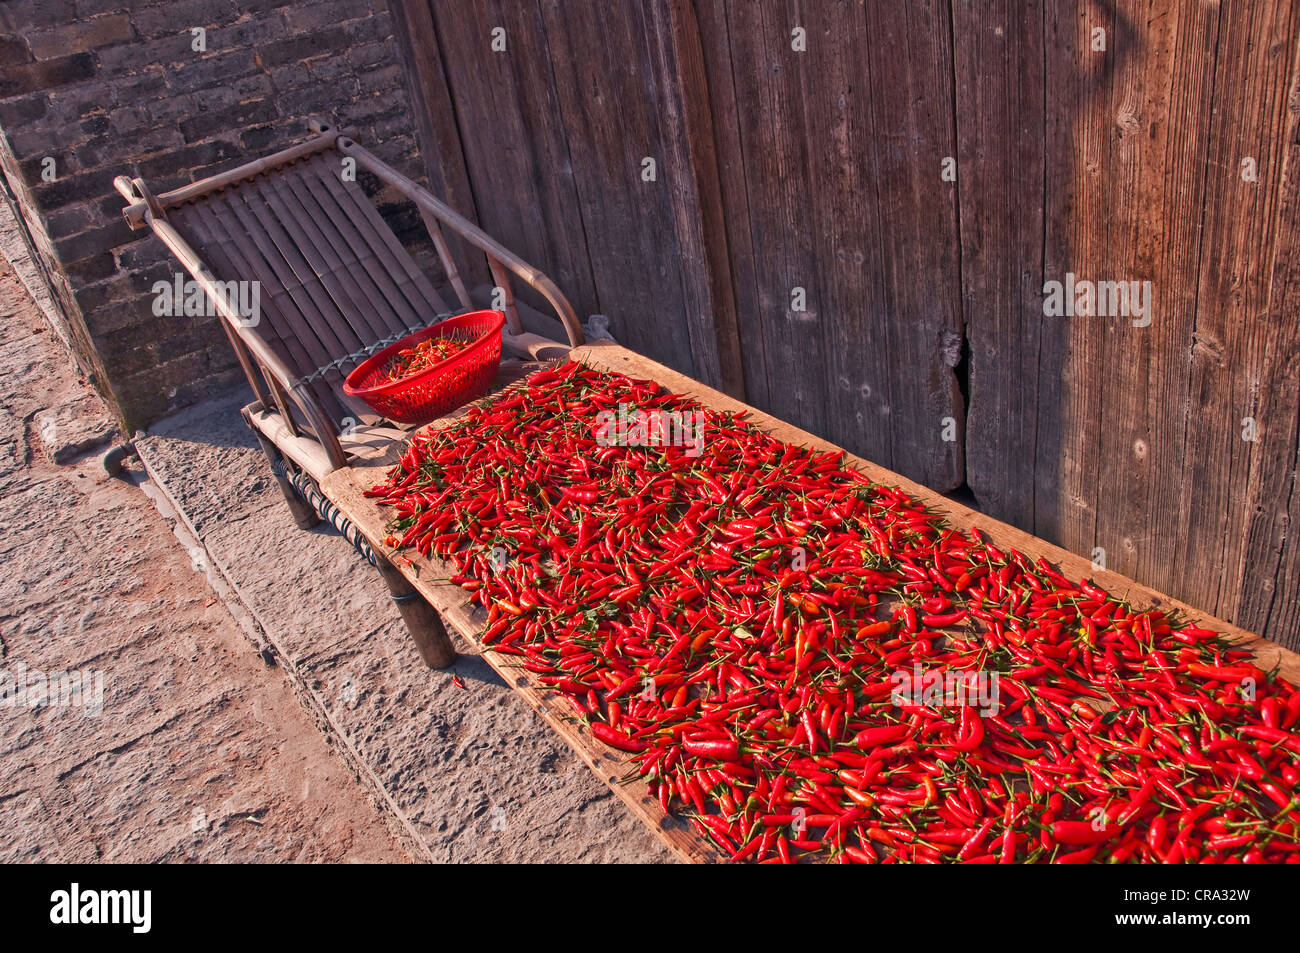 Red chilies drying in the sun - Dazhai village, Shanxi province, China Stock Photo